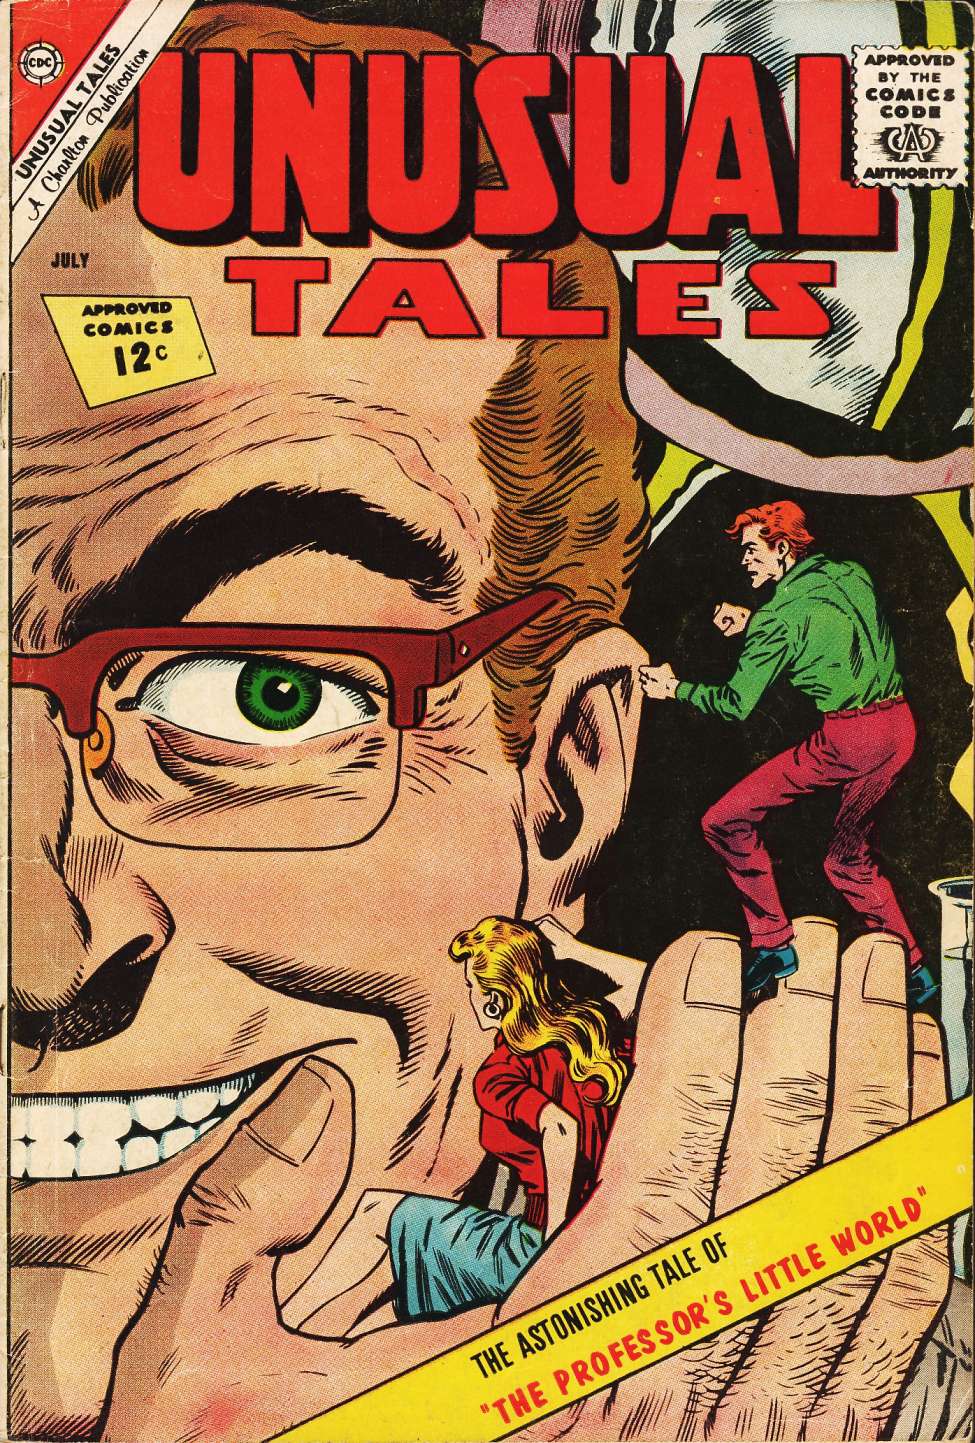 Comic Book Cover For Unusual Tales 34